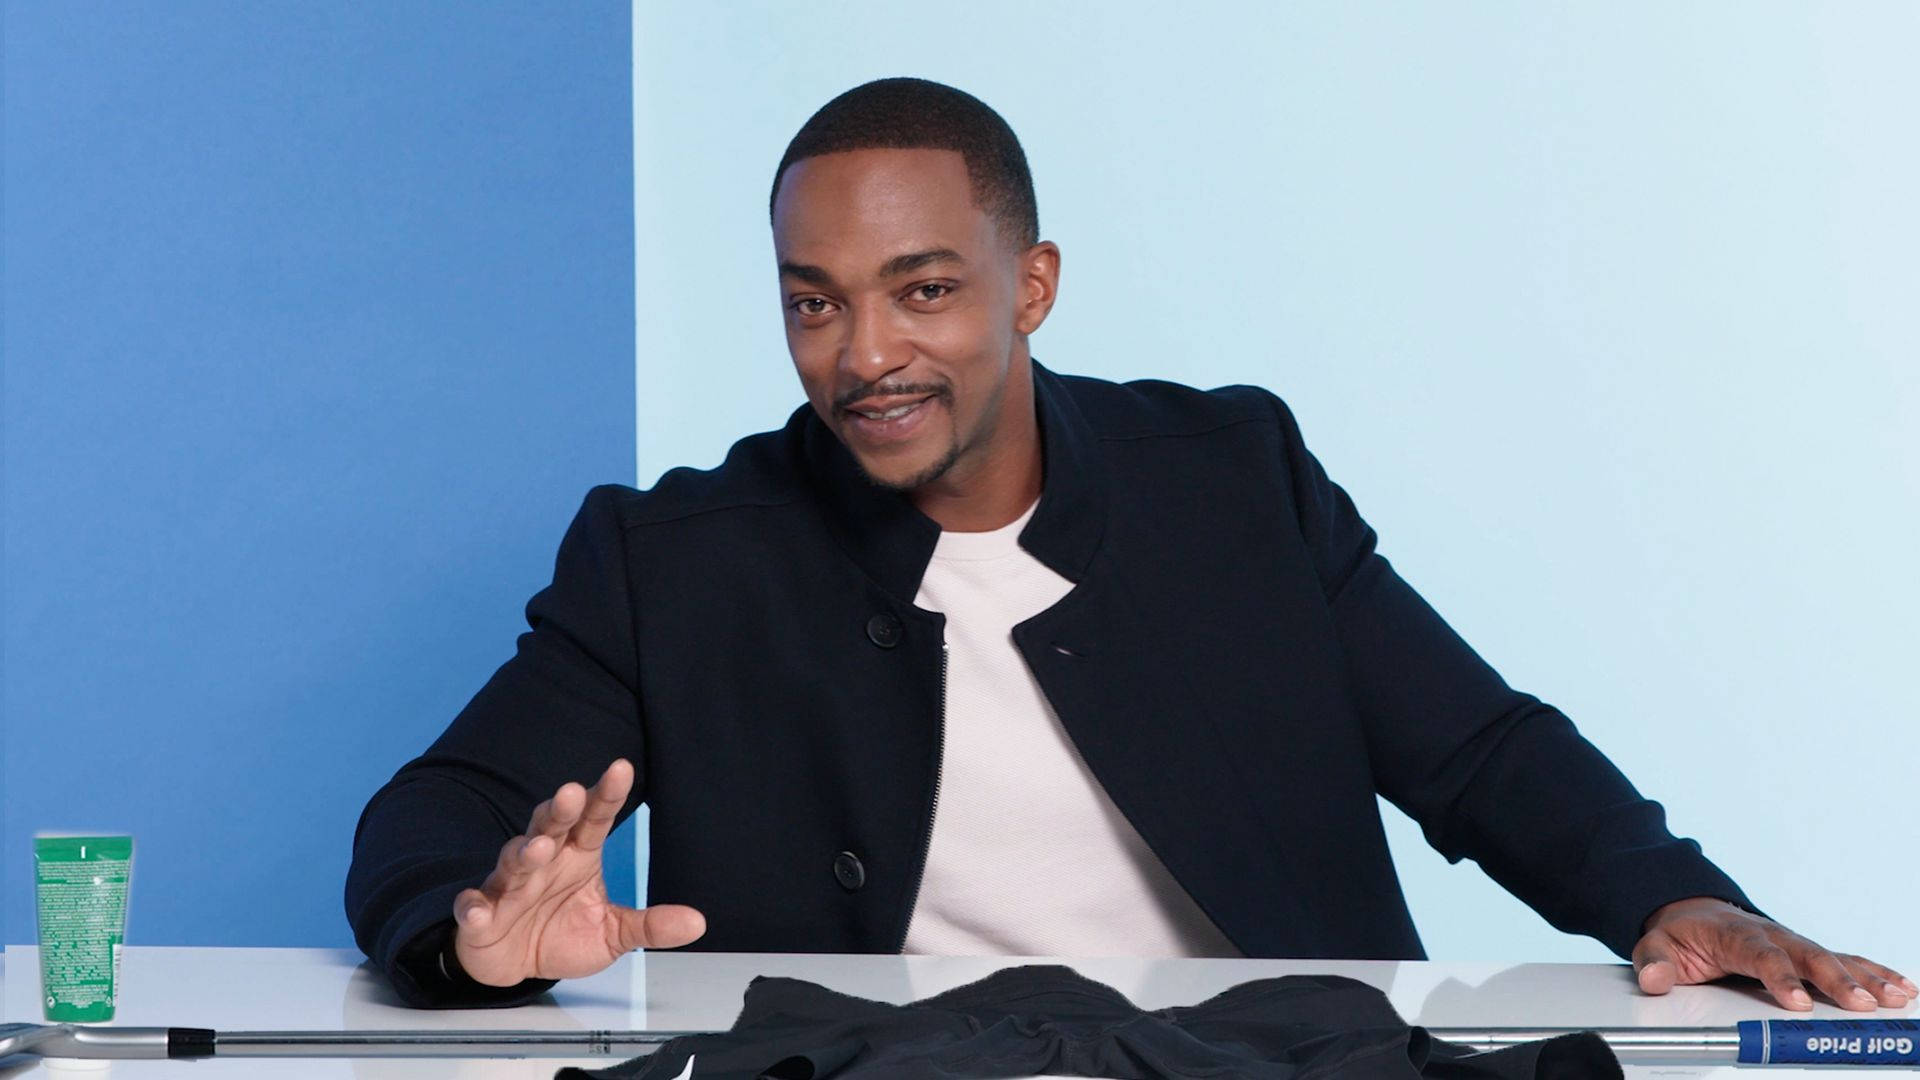 Anthony Mackie Gq Interview Wallpaper